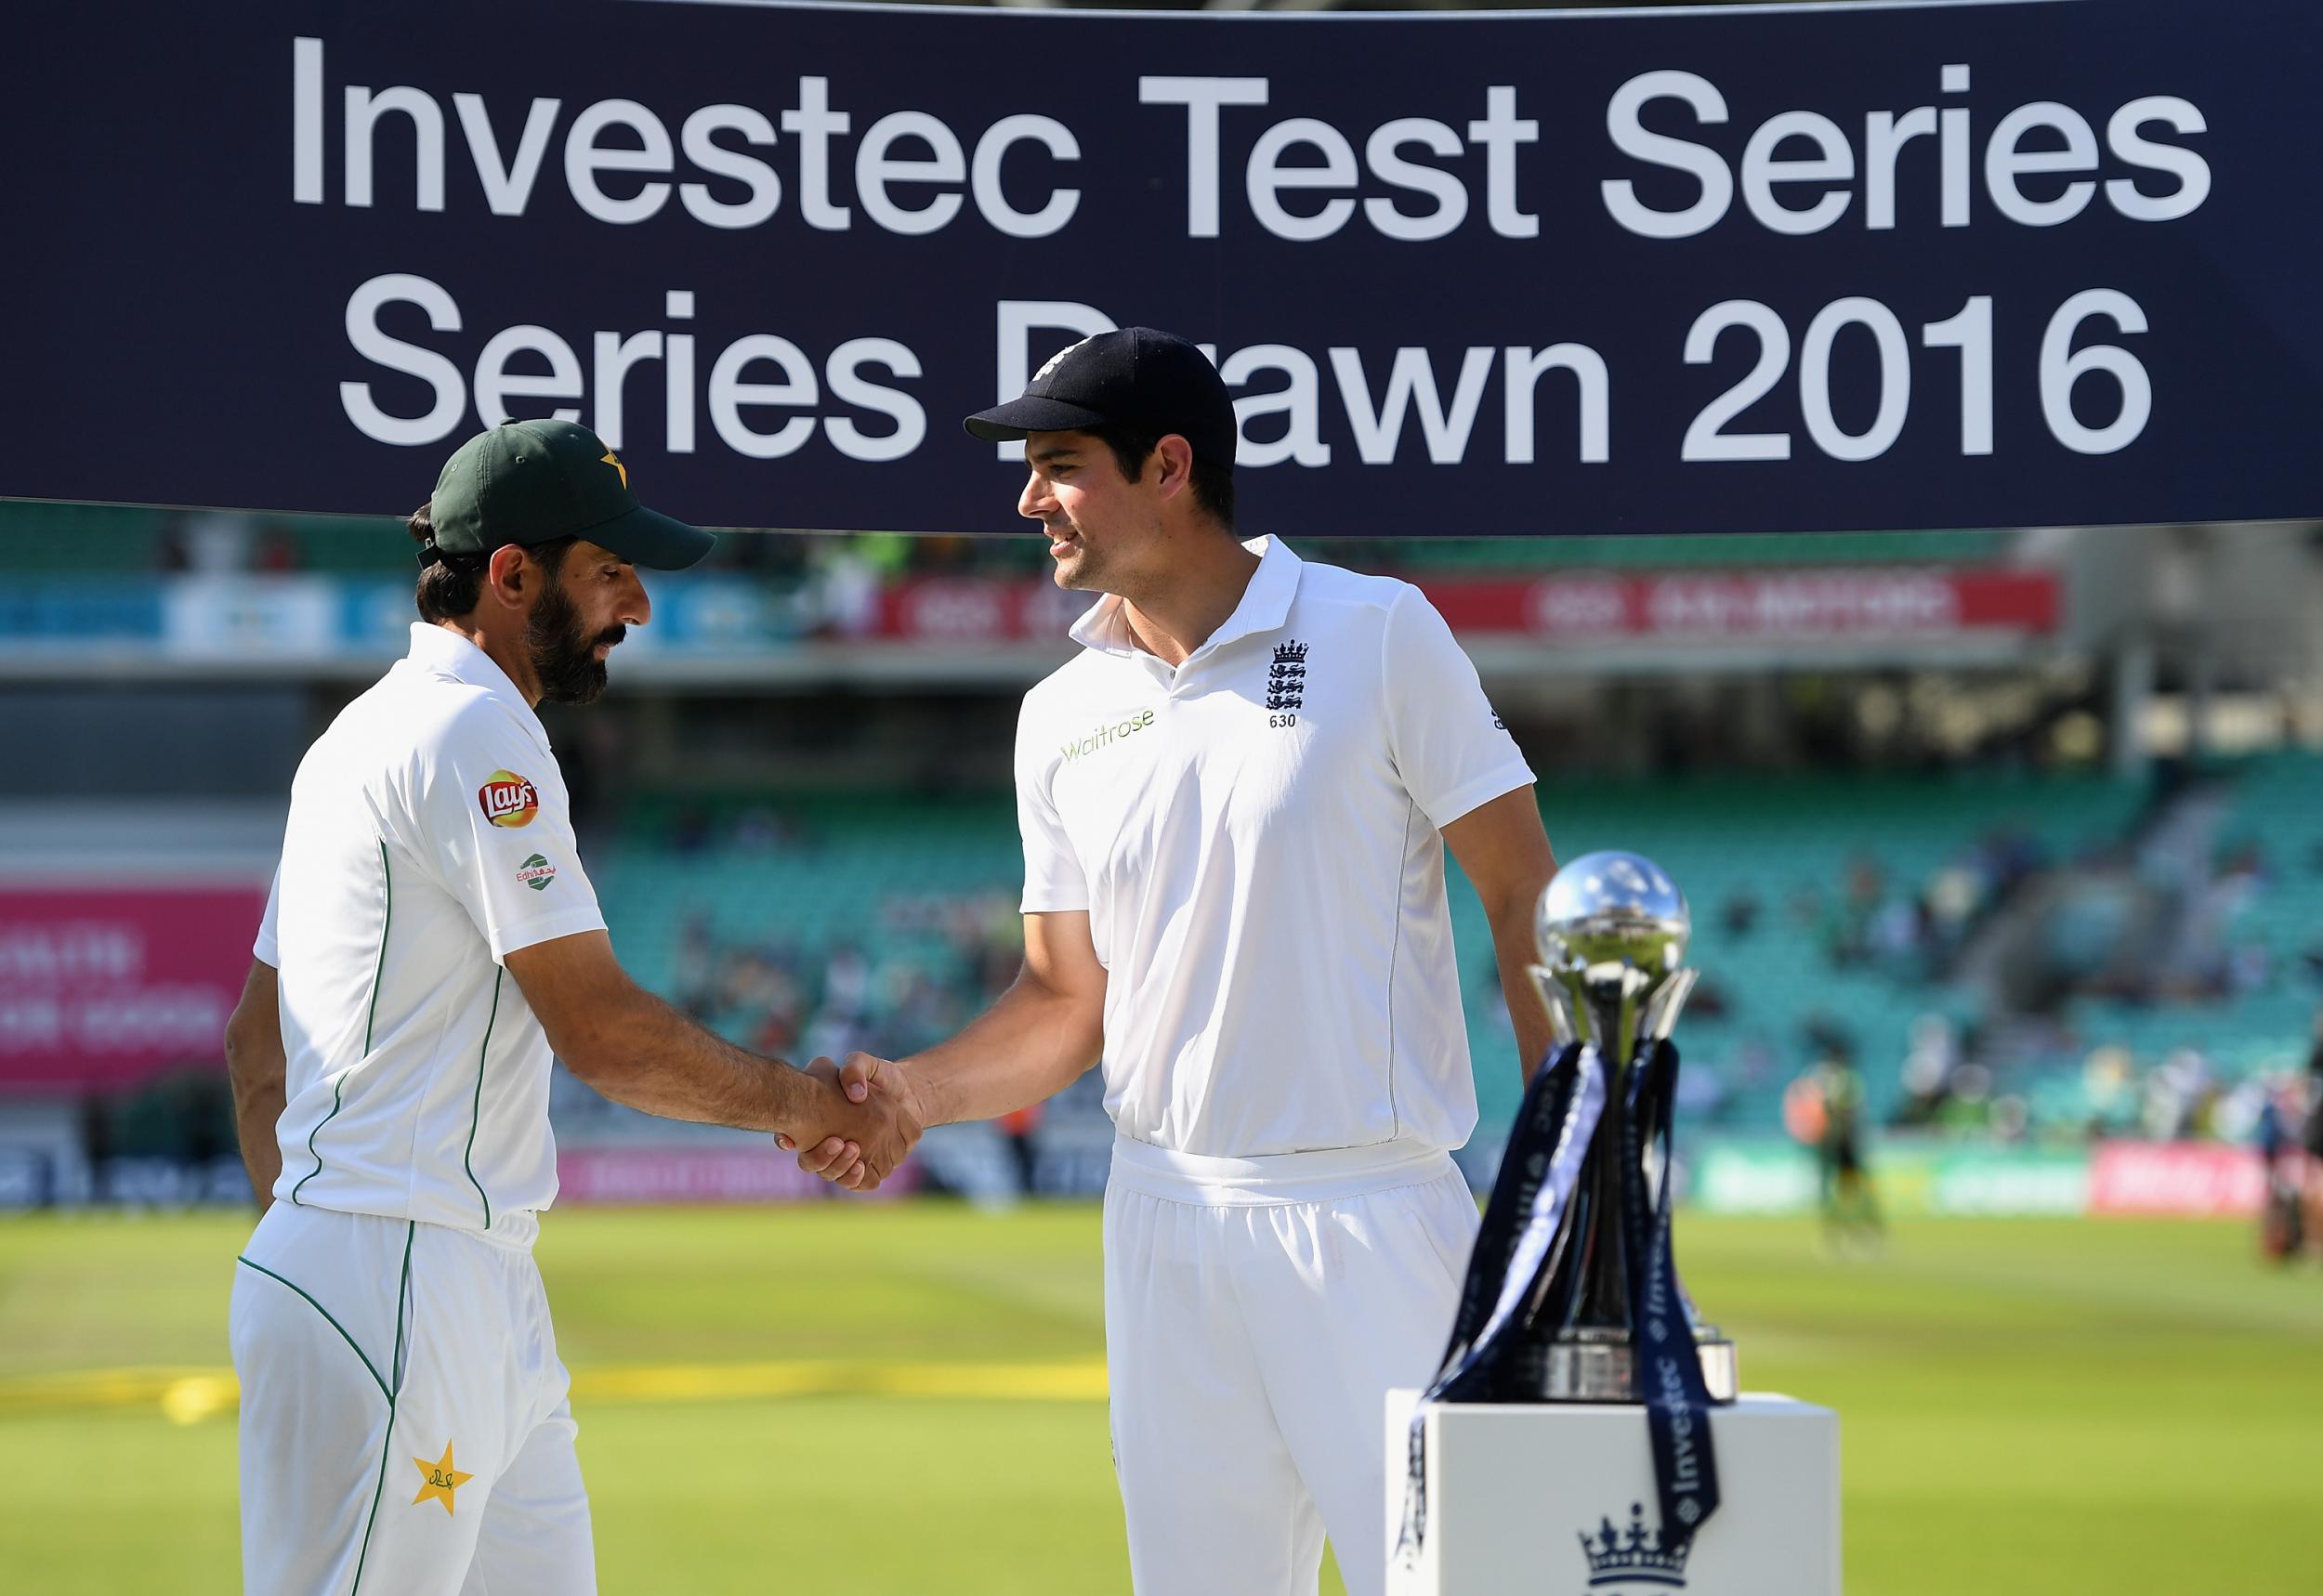 Pakistan captain Misbah-ul-Haq and England captain Alastair Cook share the series trophy after the 4th Investec Test